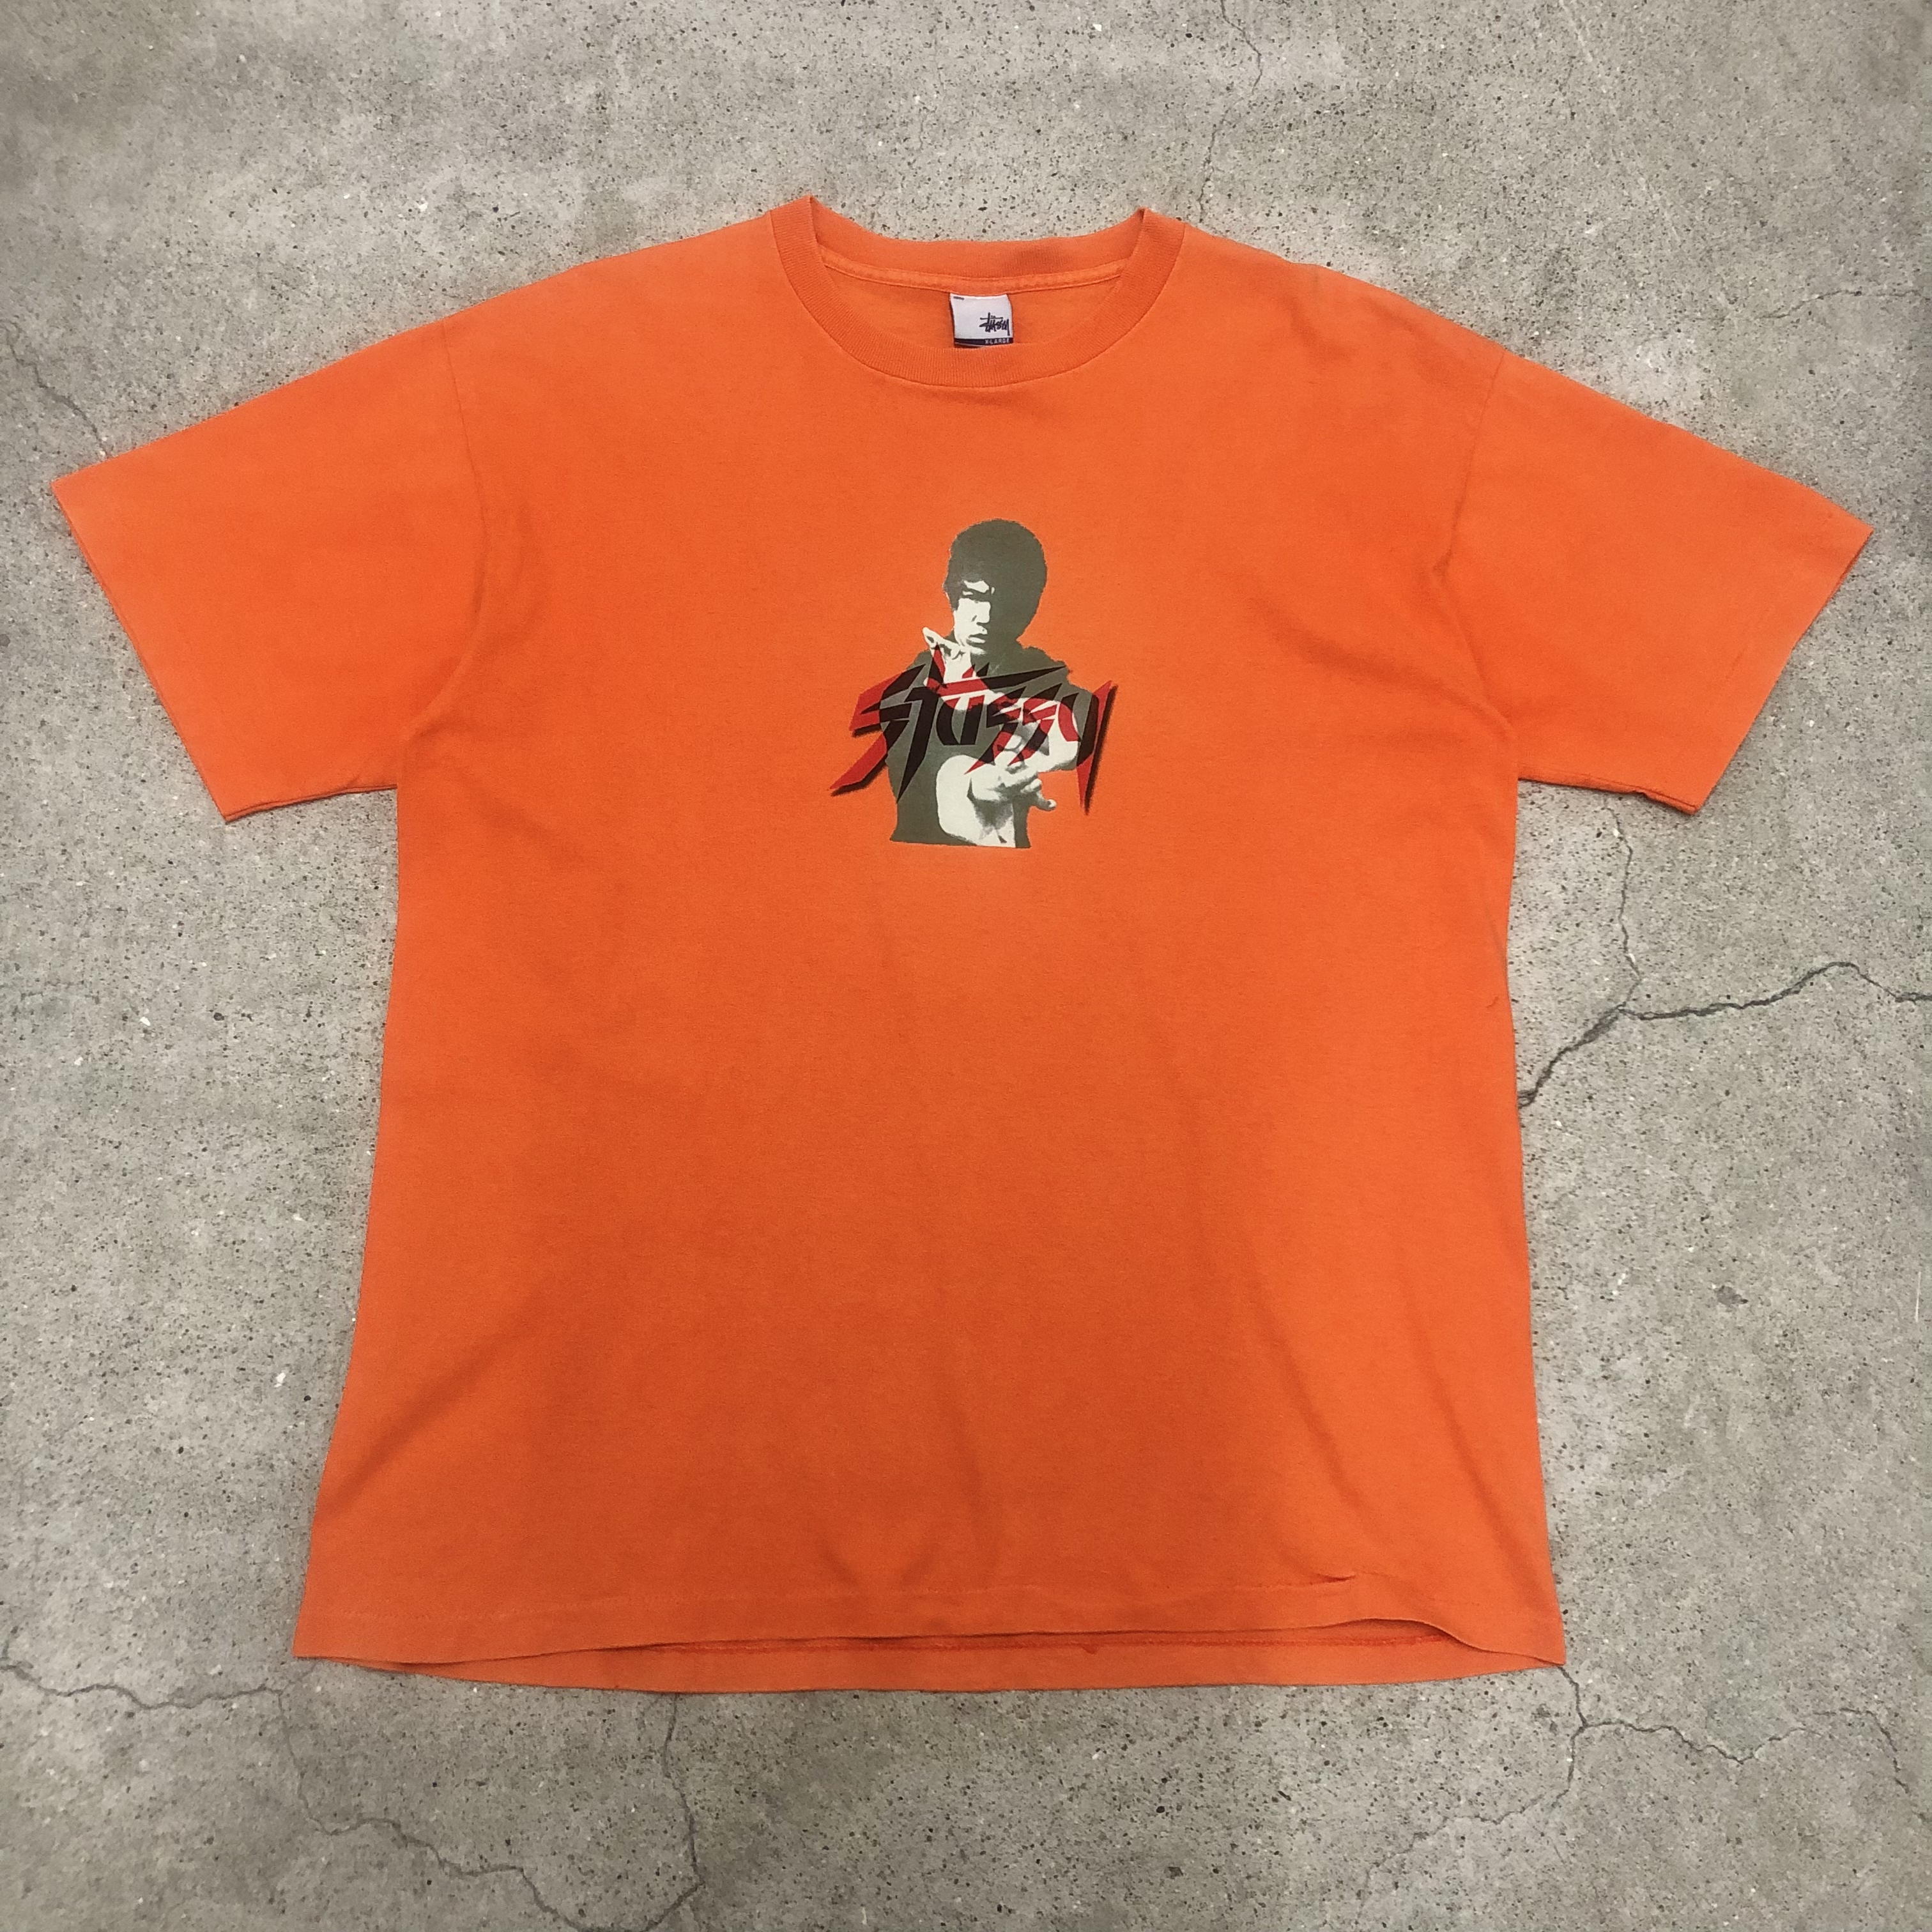 00s OLD STUSSY/Bruce Lee Tee/USA製/銀タグ/XL/ブルースリープリント